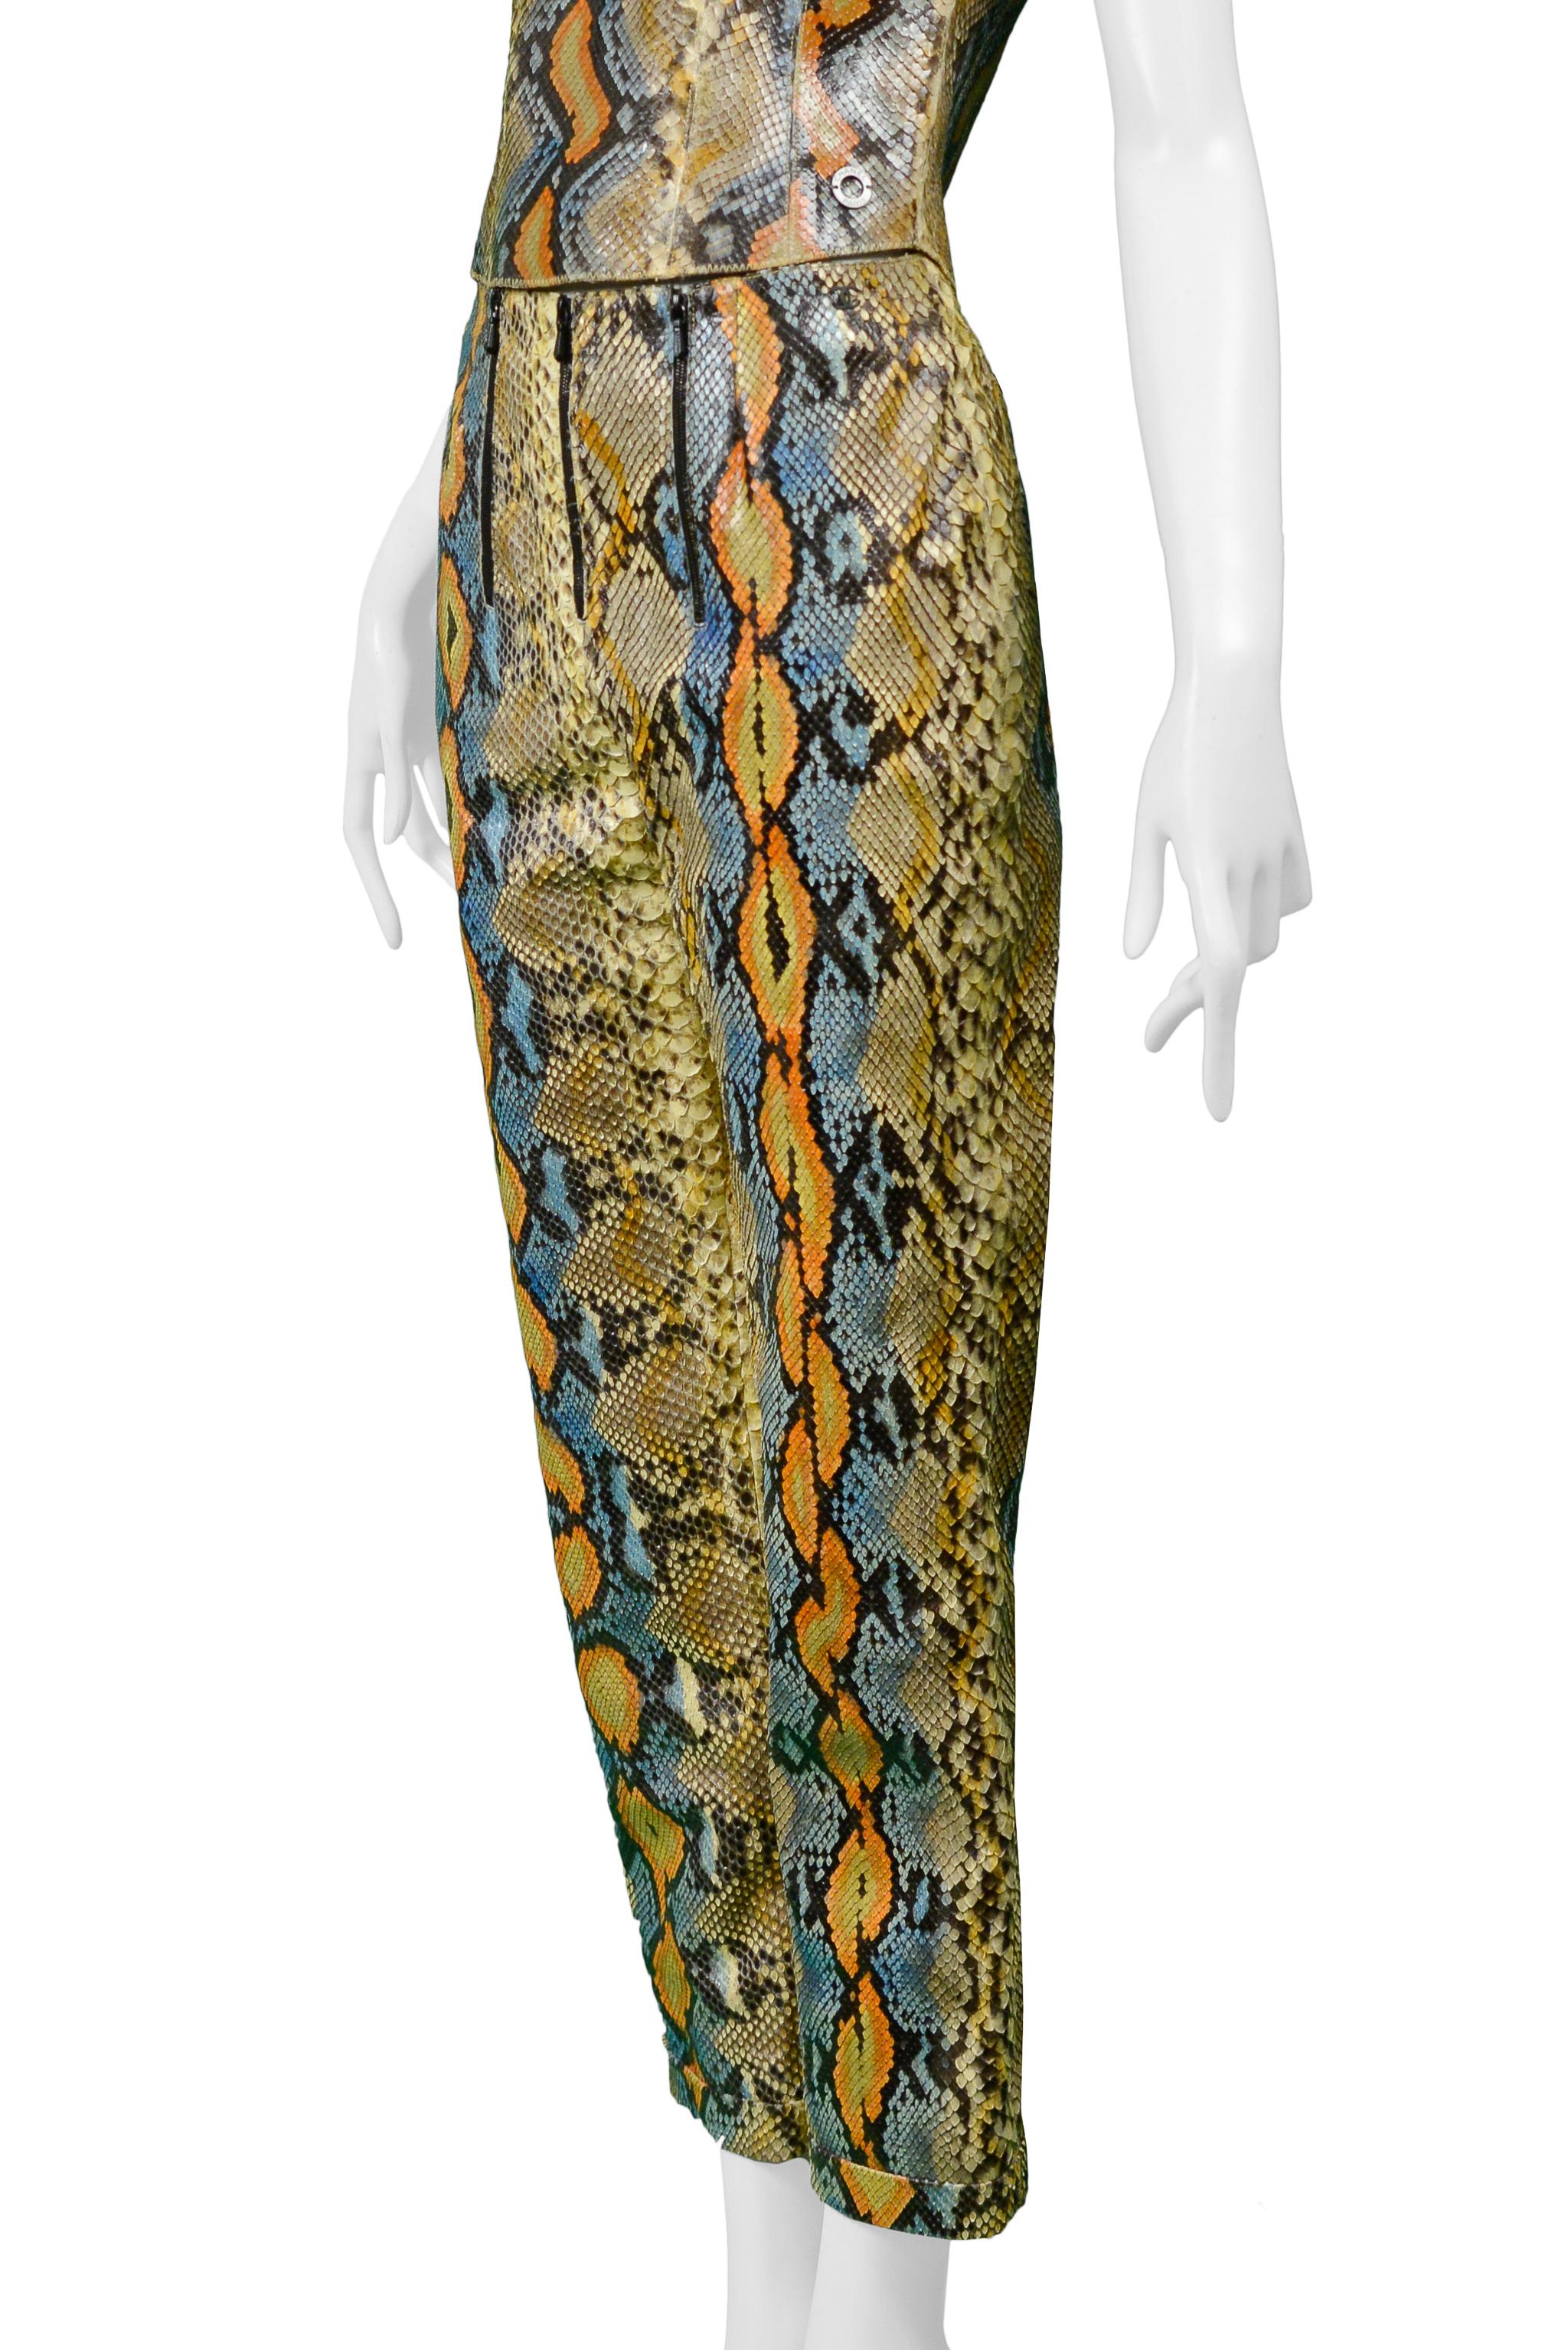 Rare Chanel Python Leather 2000 Runway Top & Pants Ensemble For Sale 1